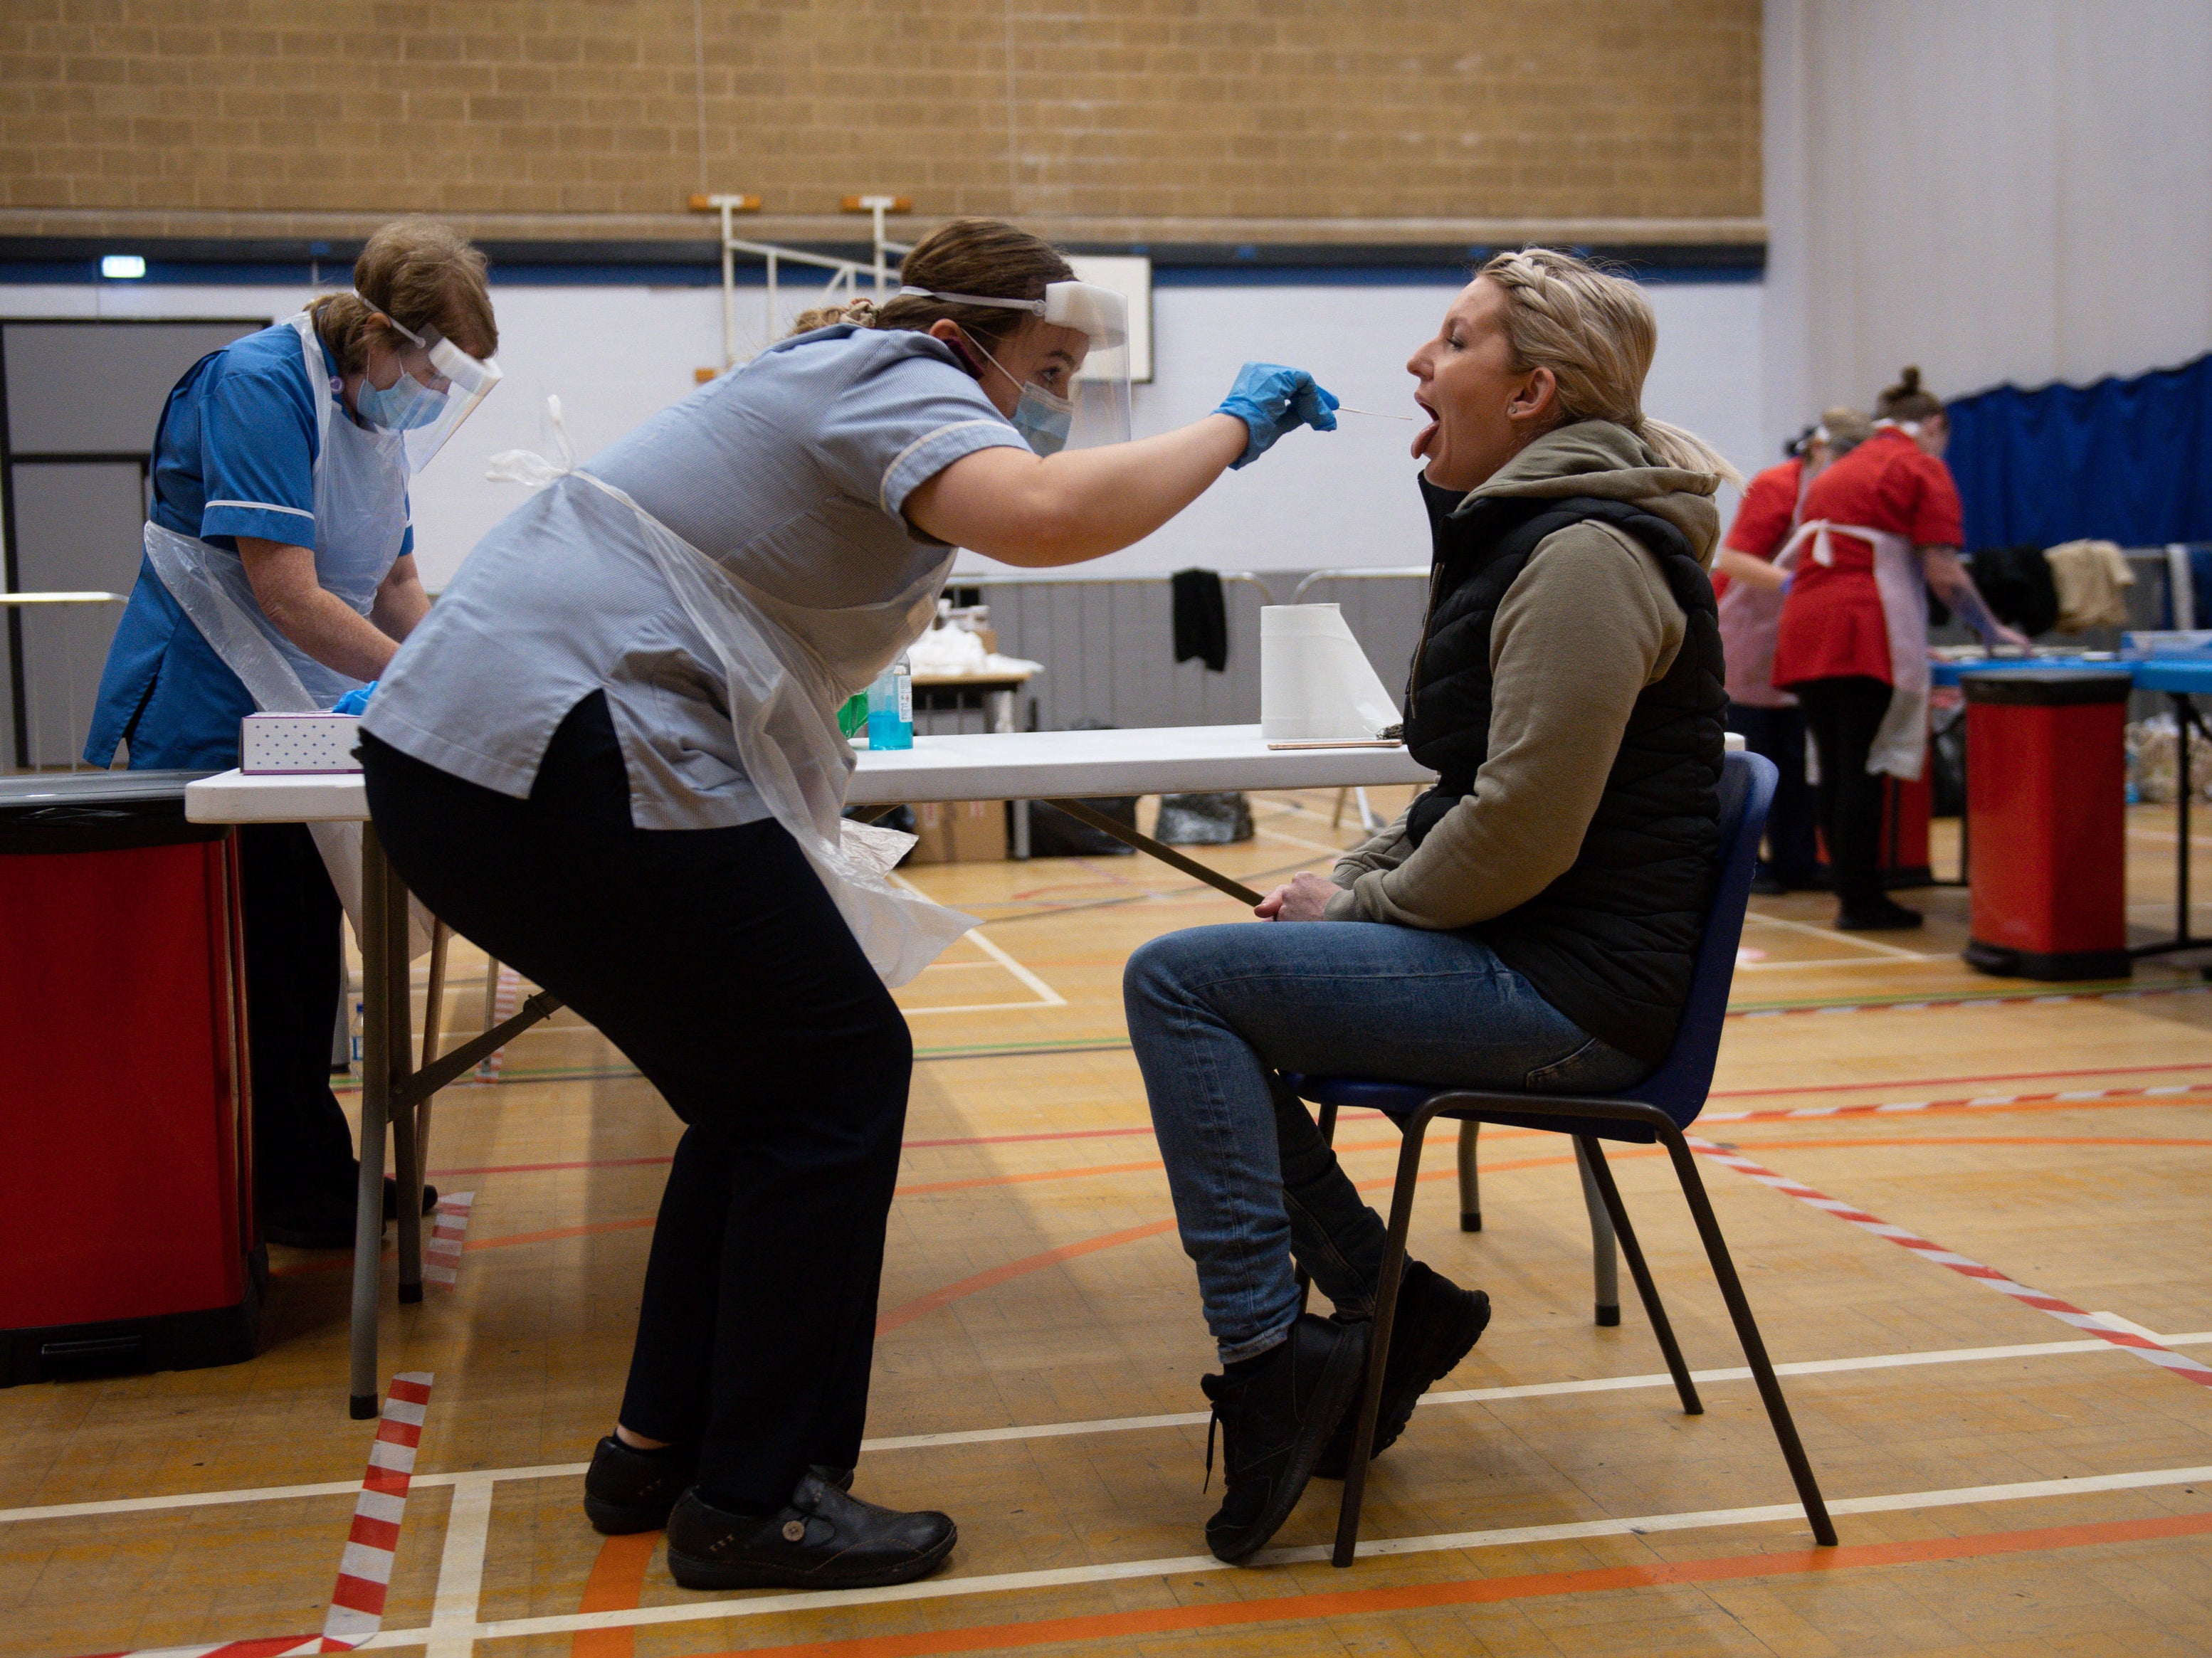 A nurse administers a test at Dimensions Leisure Centre in Stoke-on-Trent